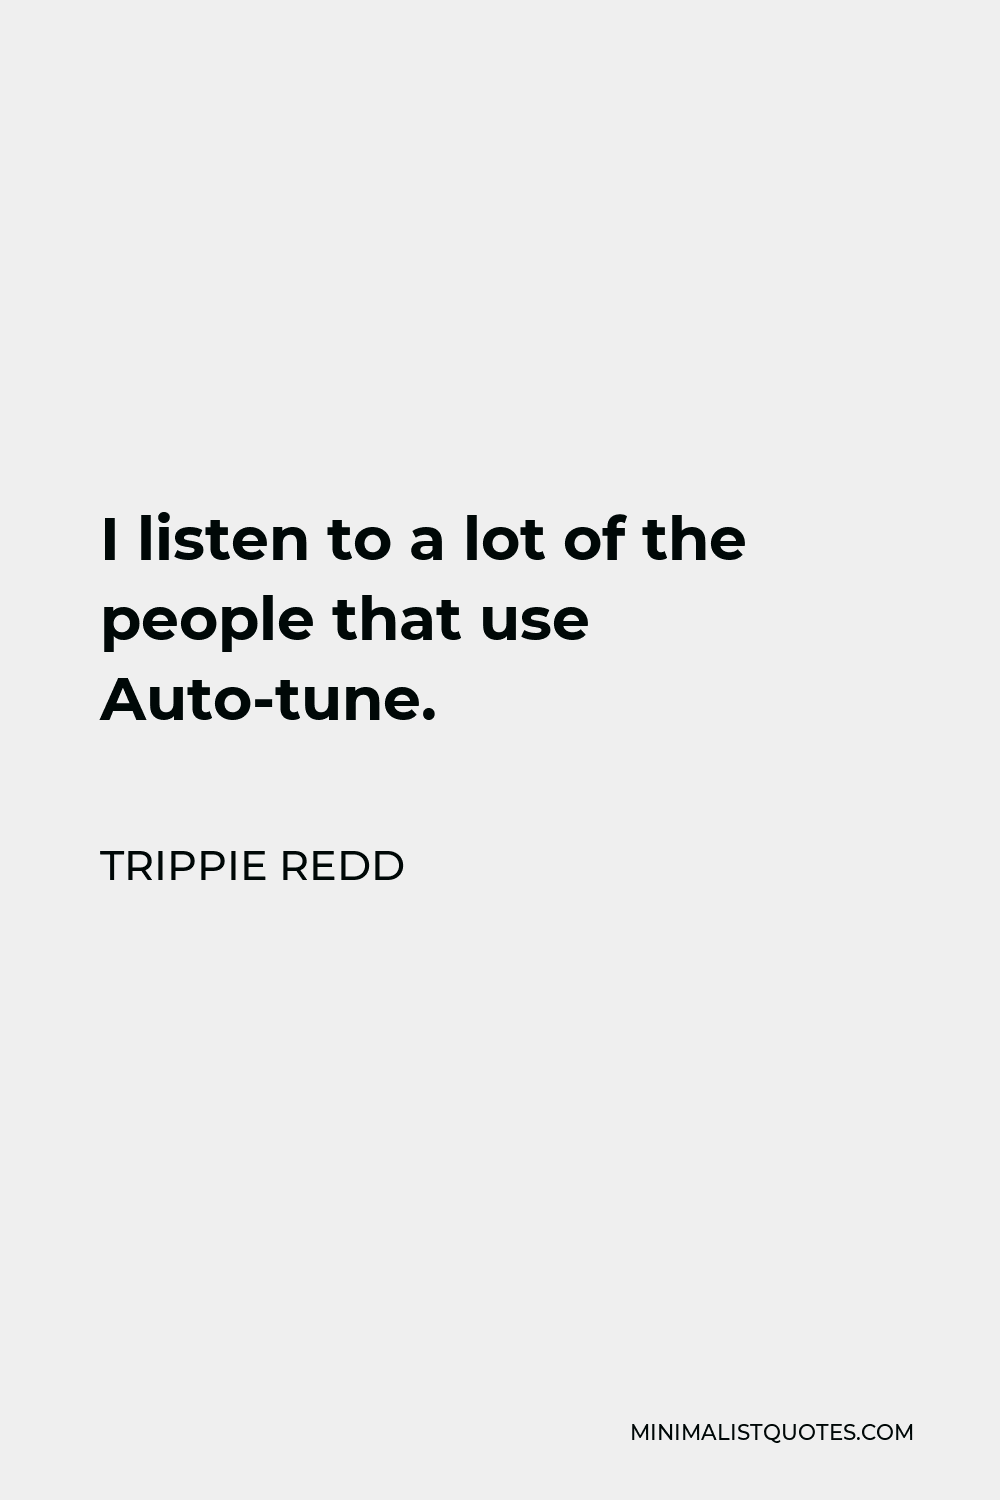 Trippie Redd Quote - I listen to a lot of the people that use Auto-tune.